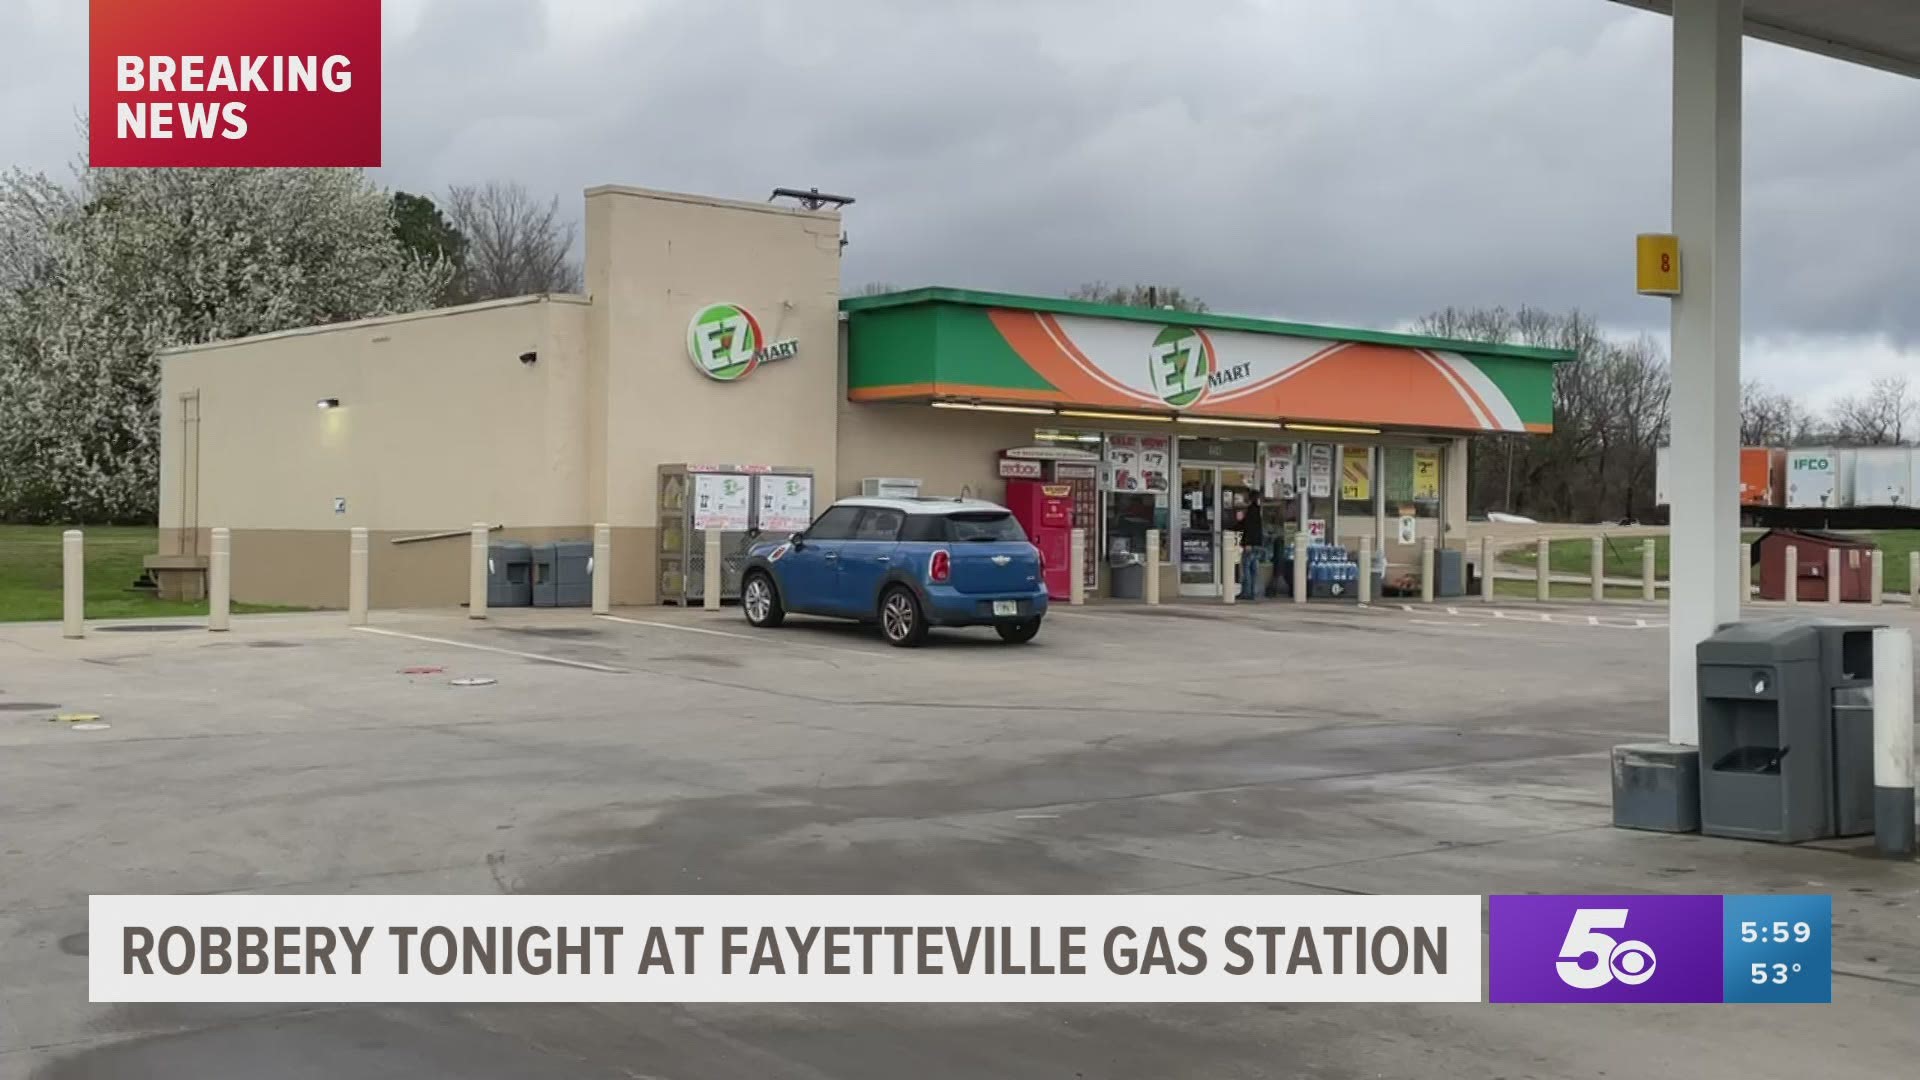 Robbery at Fayetteville gas station